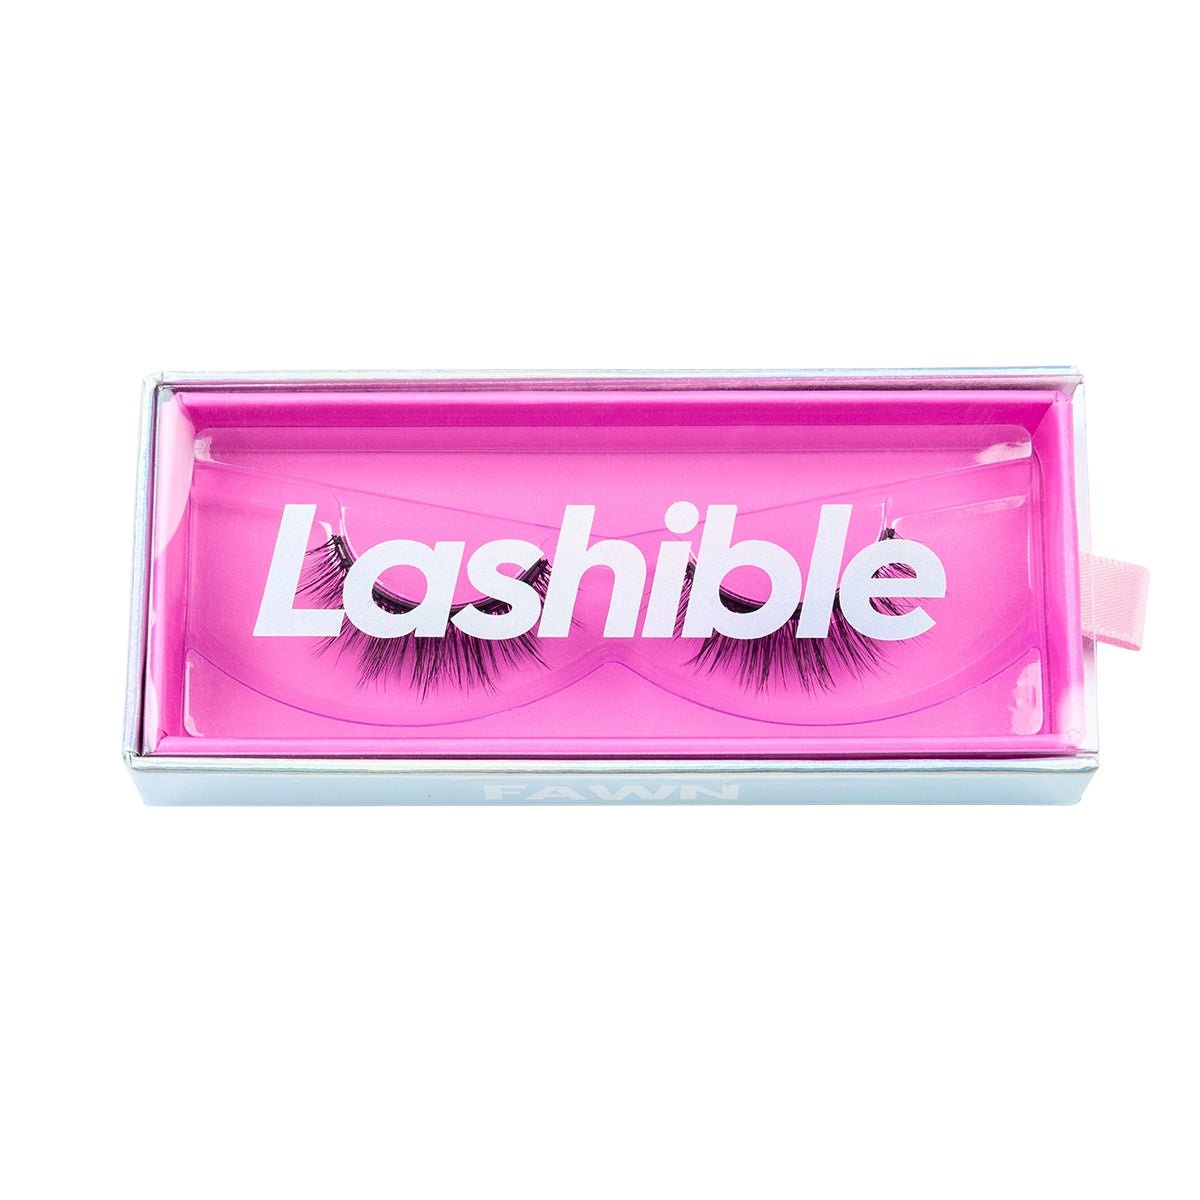 Fawn Lashes Only - Lashible